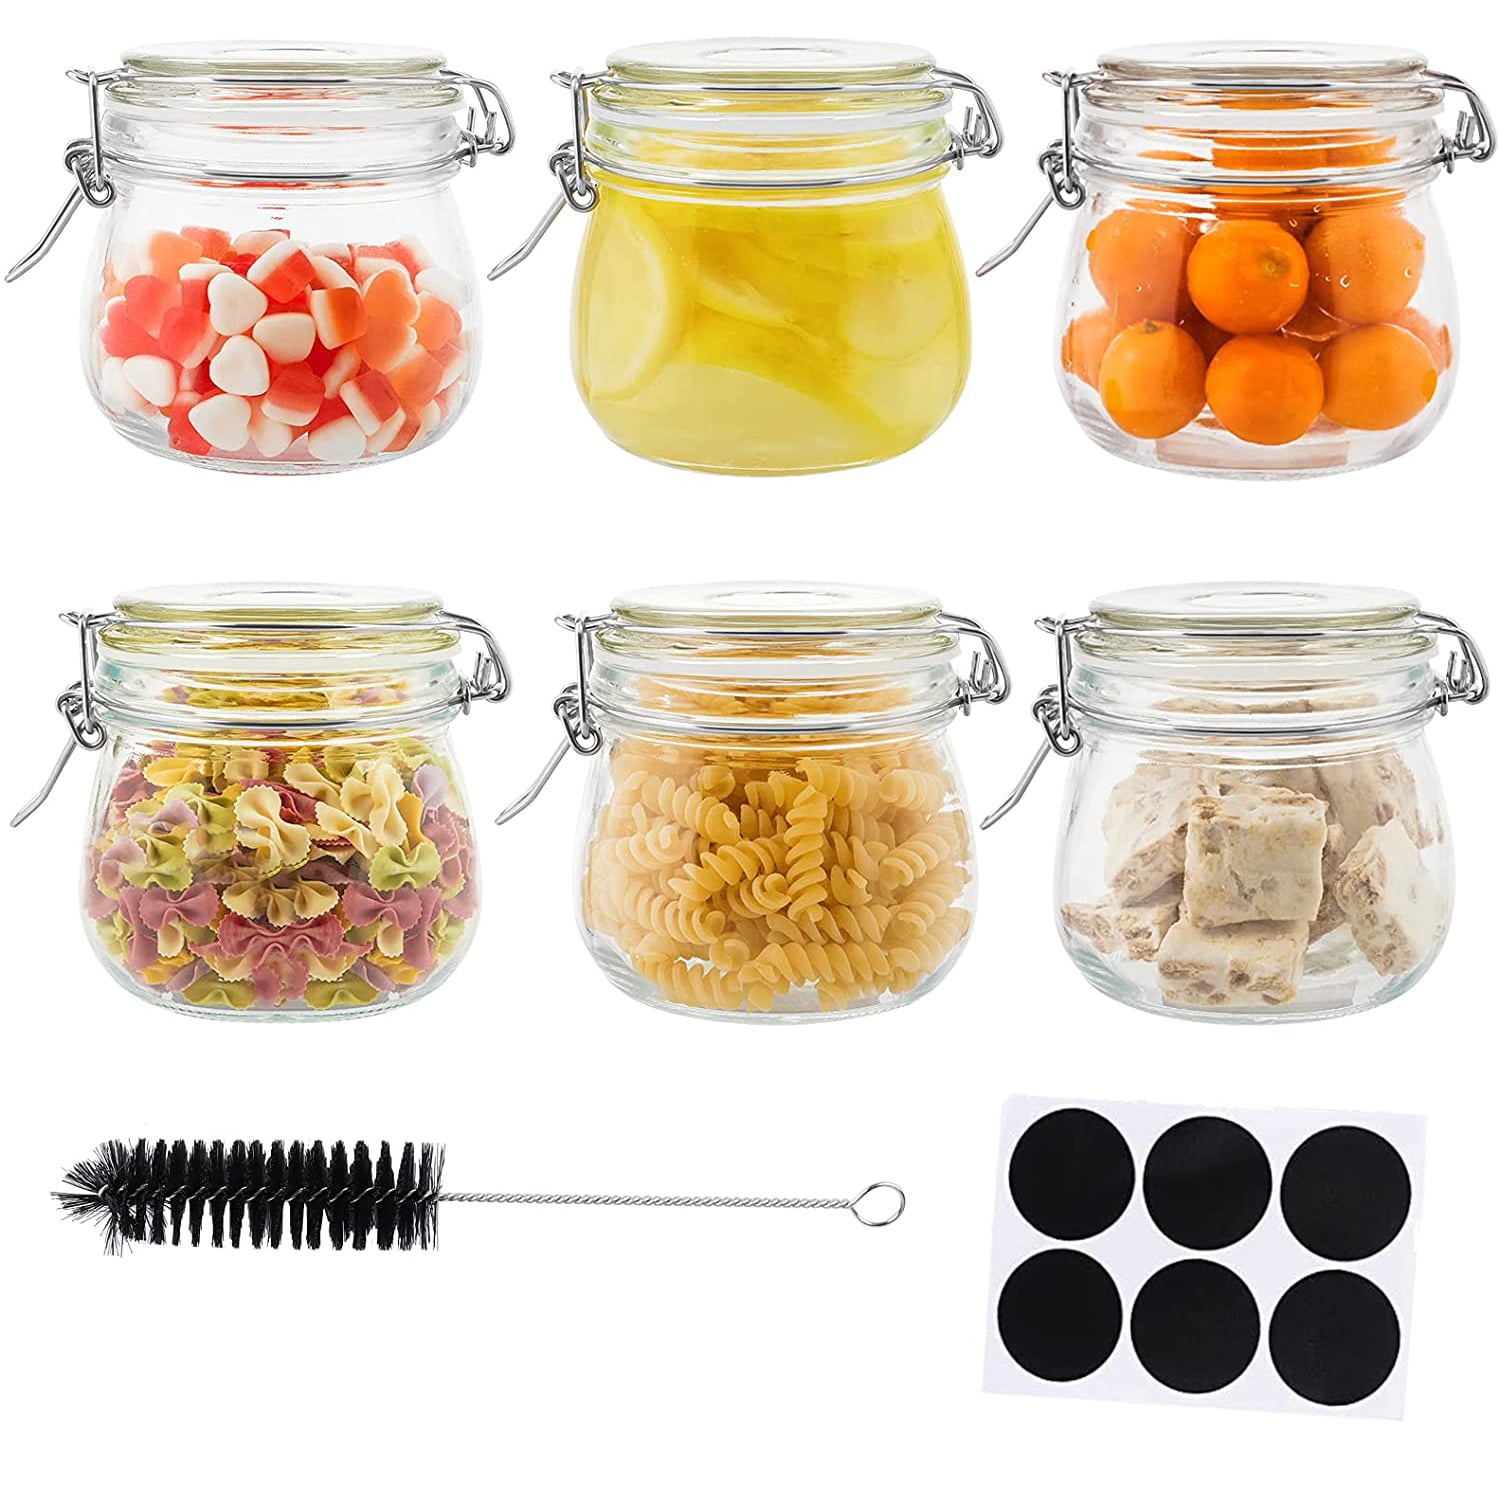 Star Work - Glass Jar With Airtight Glass Lid For Canning, Fermenting  (1500ml)